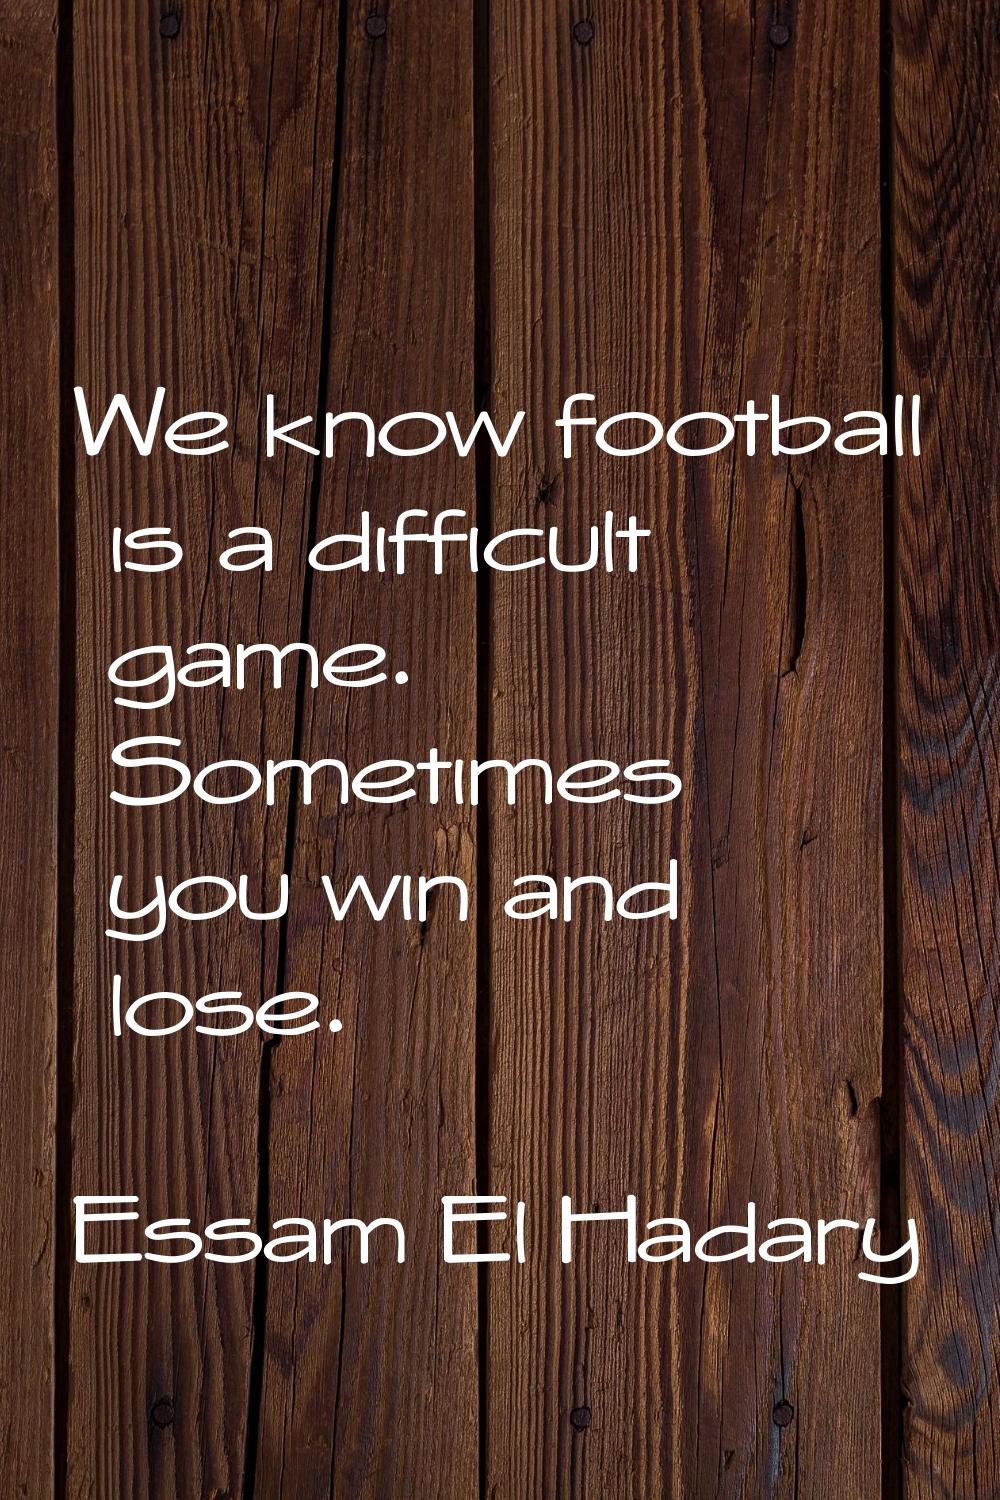 We know football is a difficult game. Sometimes you win and lose.